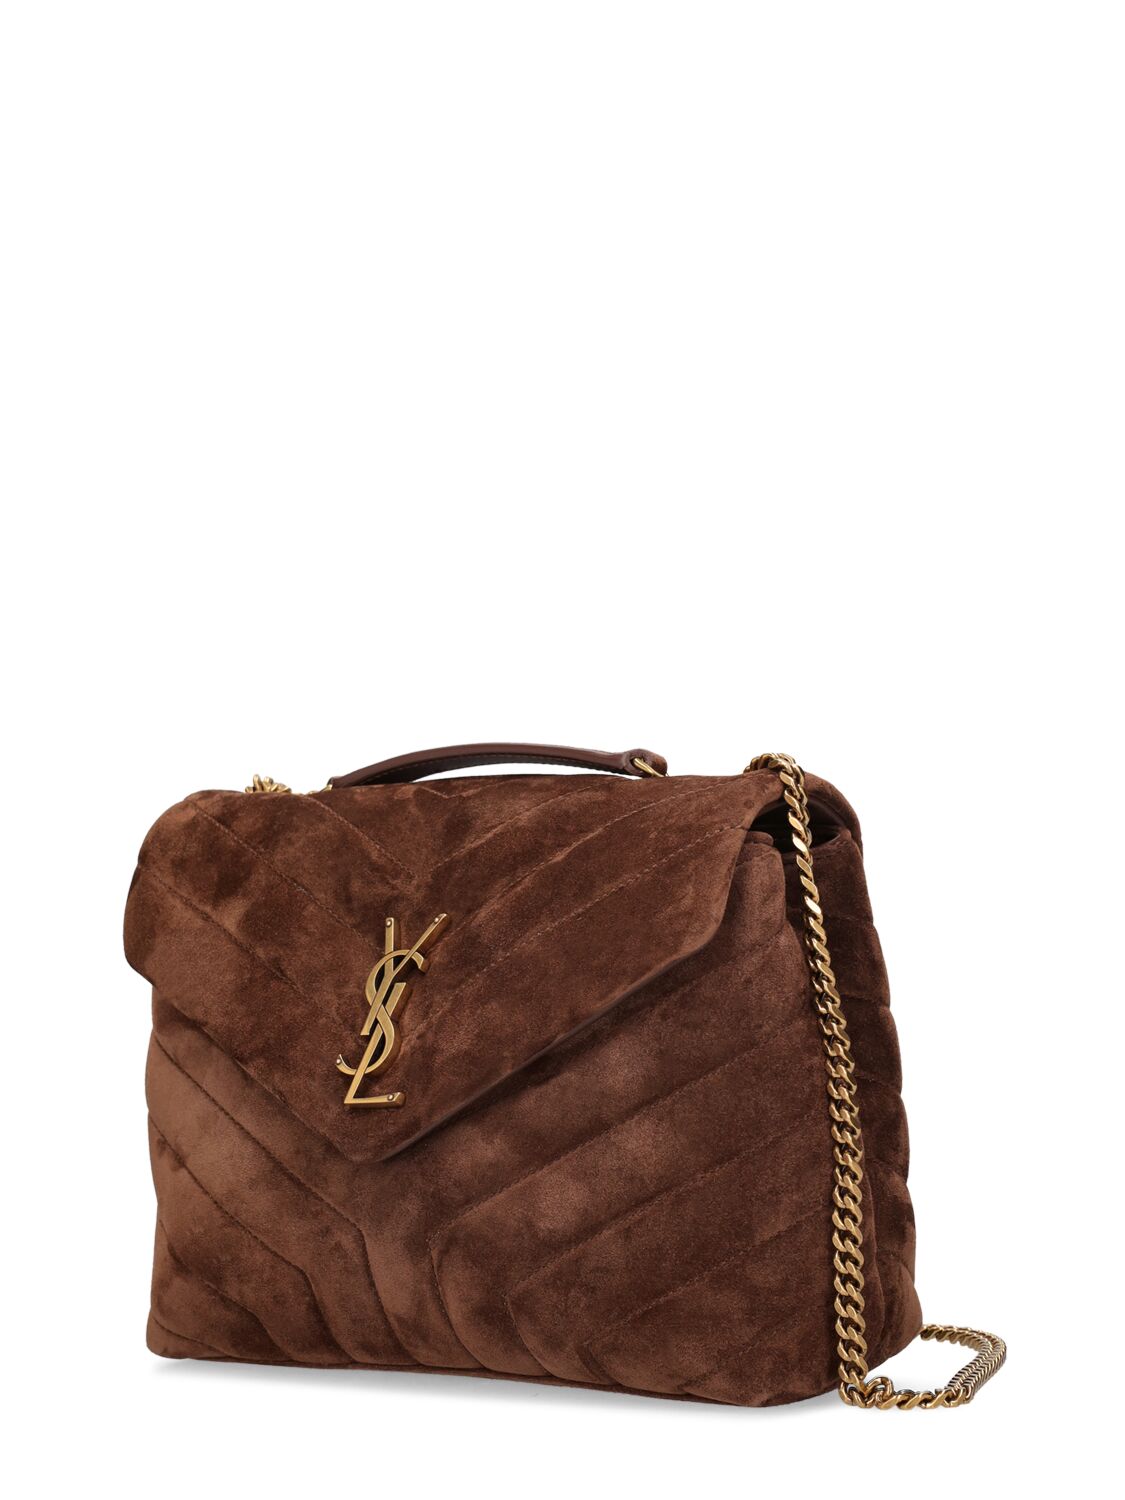 Saint Laurent Small Loulou Monogram Brown Coffee Suede Bag New FW23